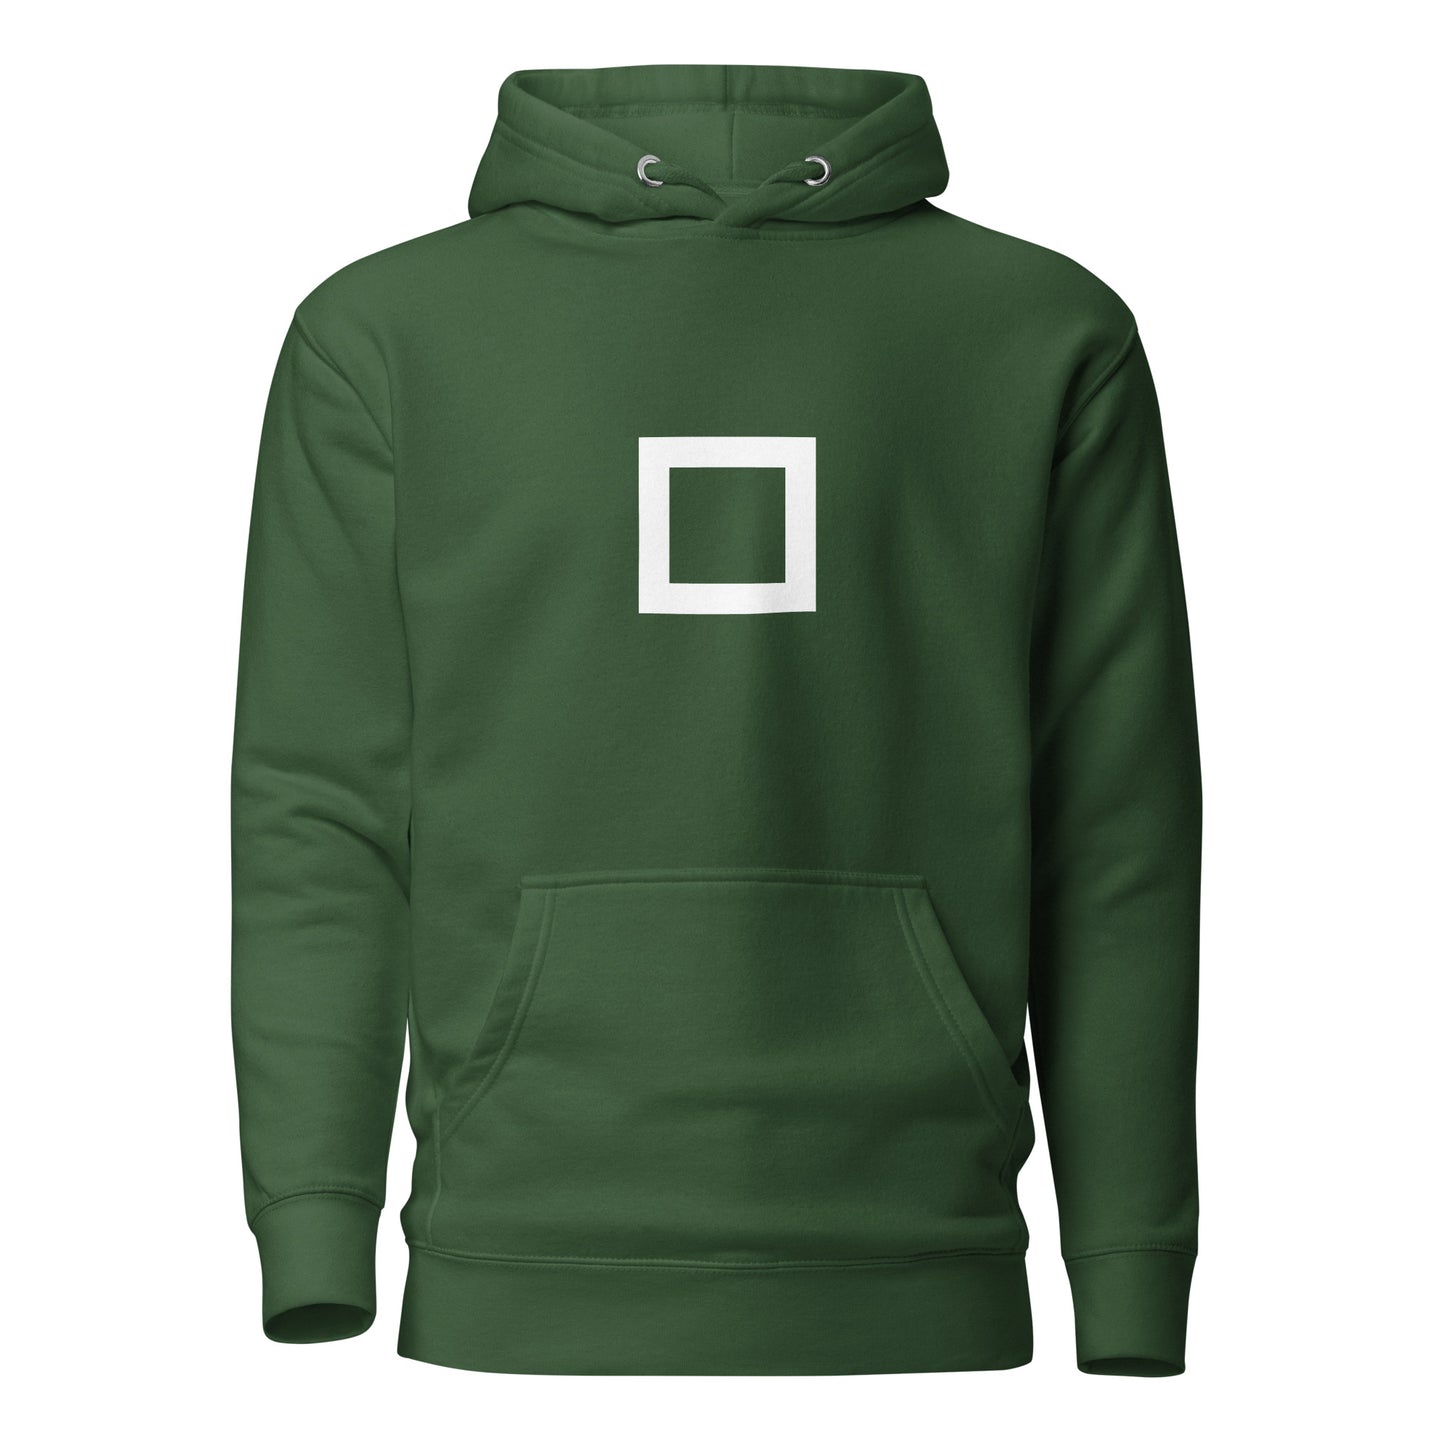 Square (Wh) Hoodie